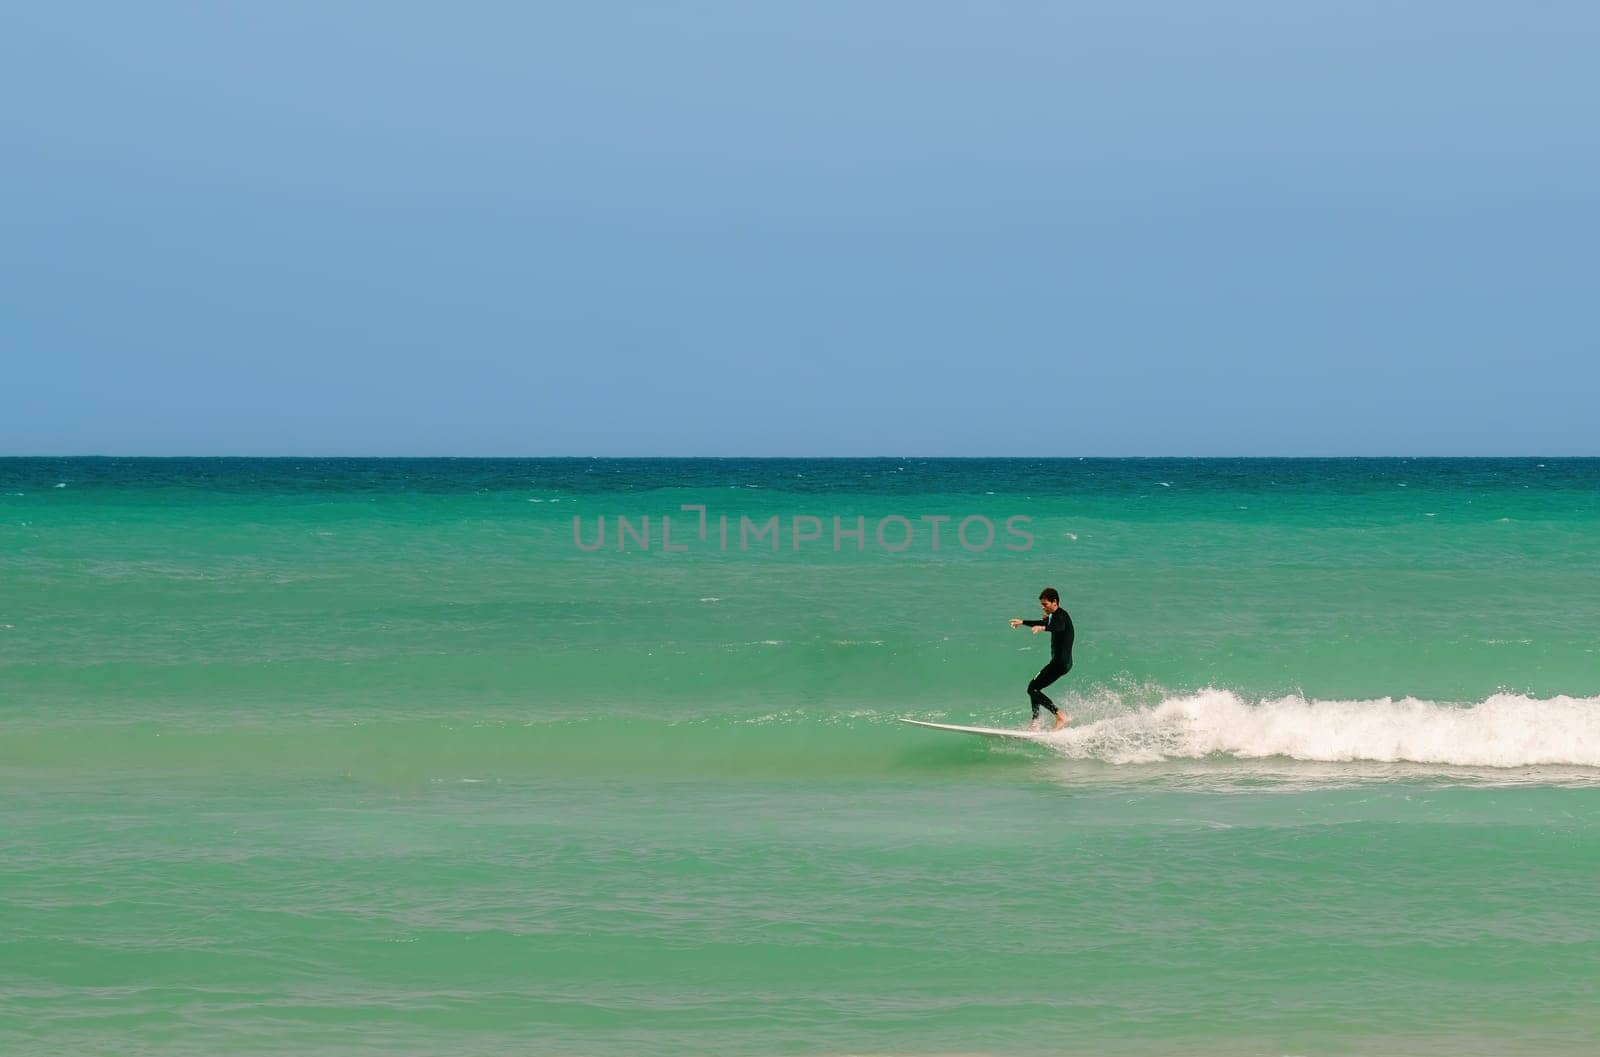 Surfing on a water board. Surfer ride the waves on the sea. Netanya, Israel. May 23, 2023 by Renisons